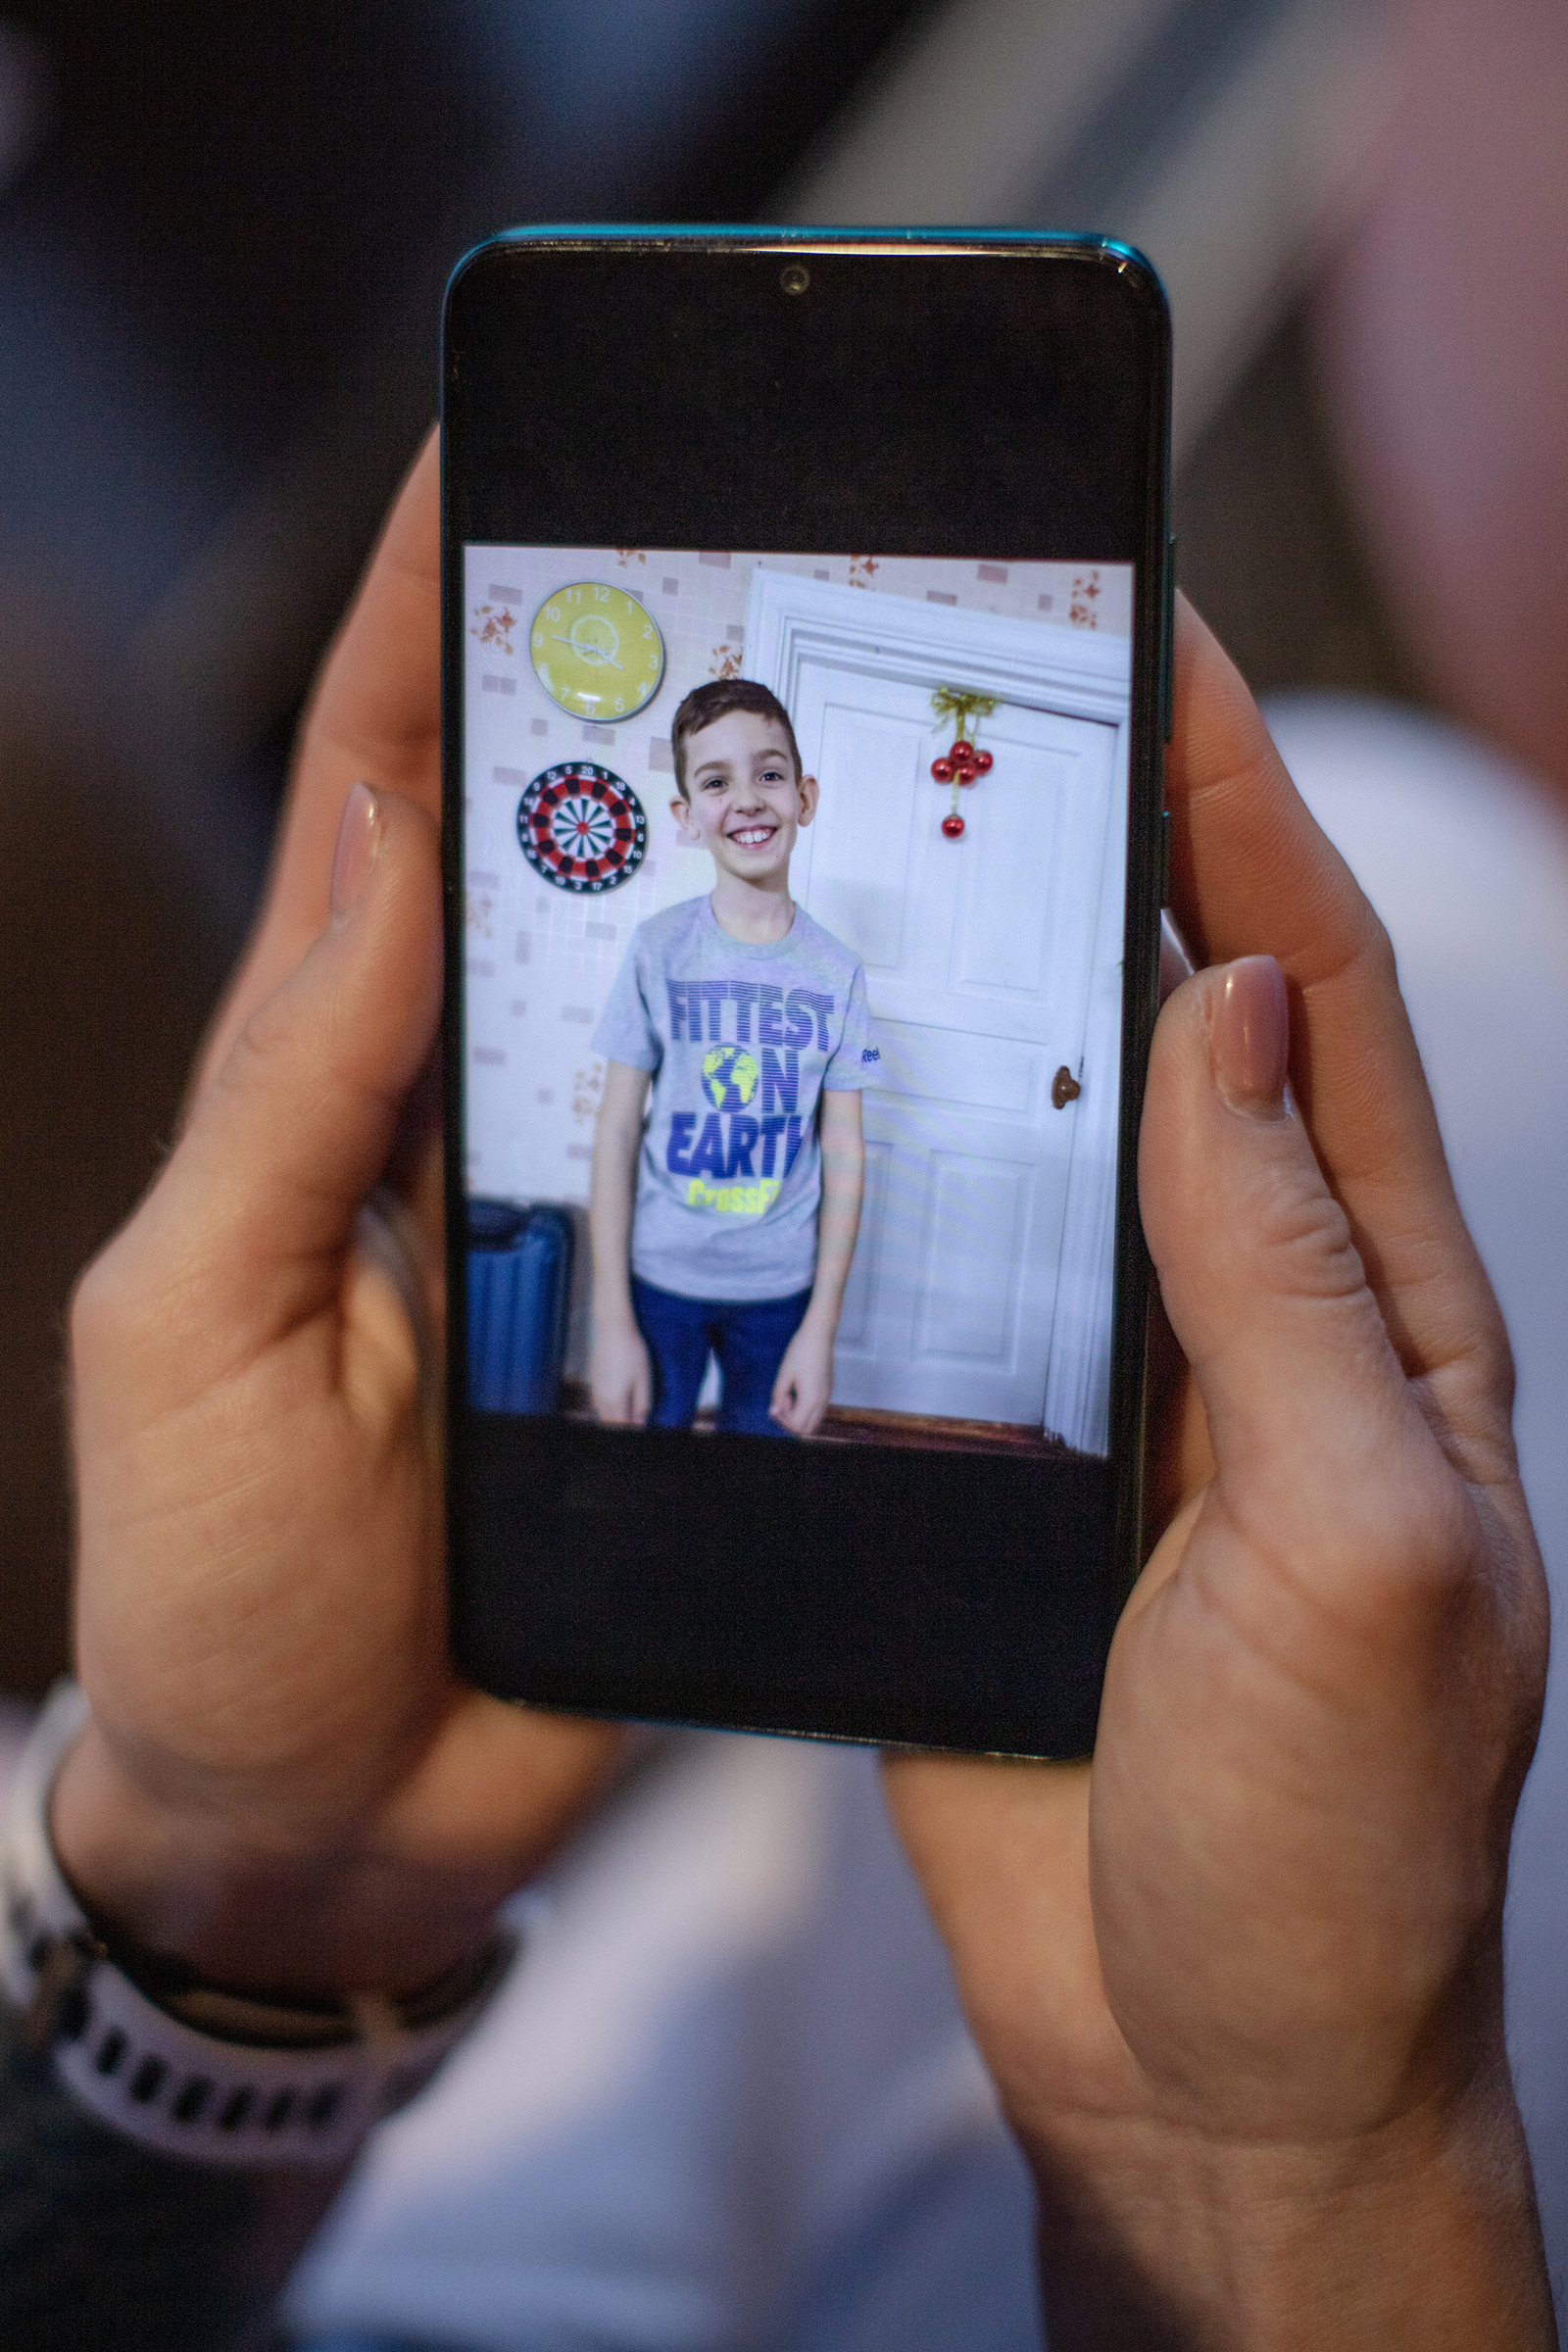 Alisa Kosheleva shows a photo of her son on her cell phone in Lviv on March 8 (Natalie Keyssar for TIME)